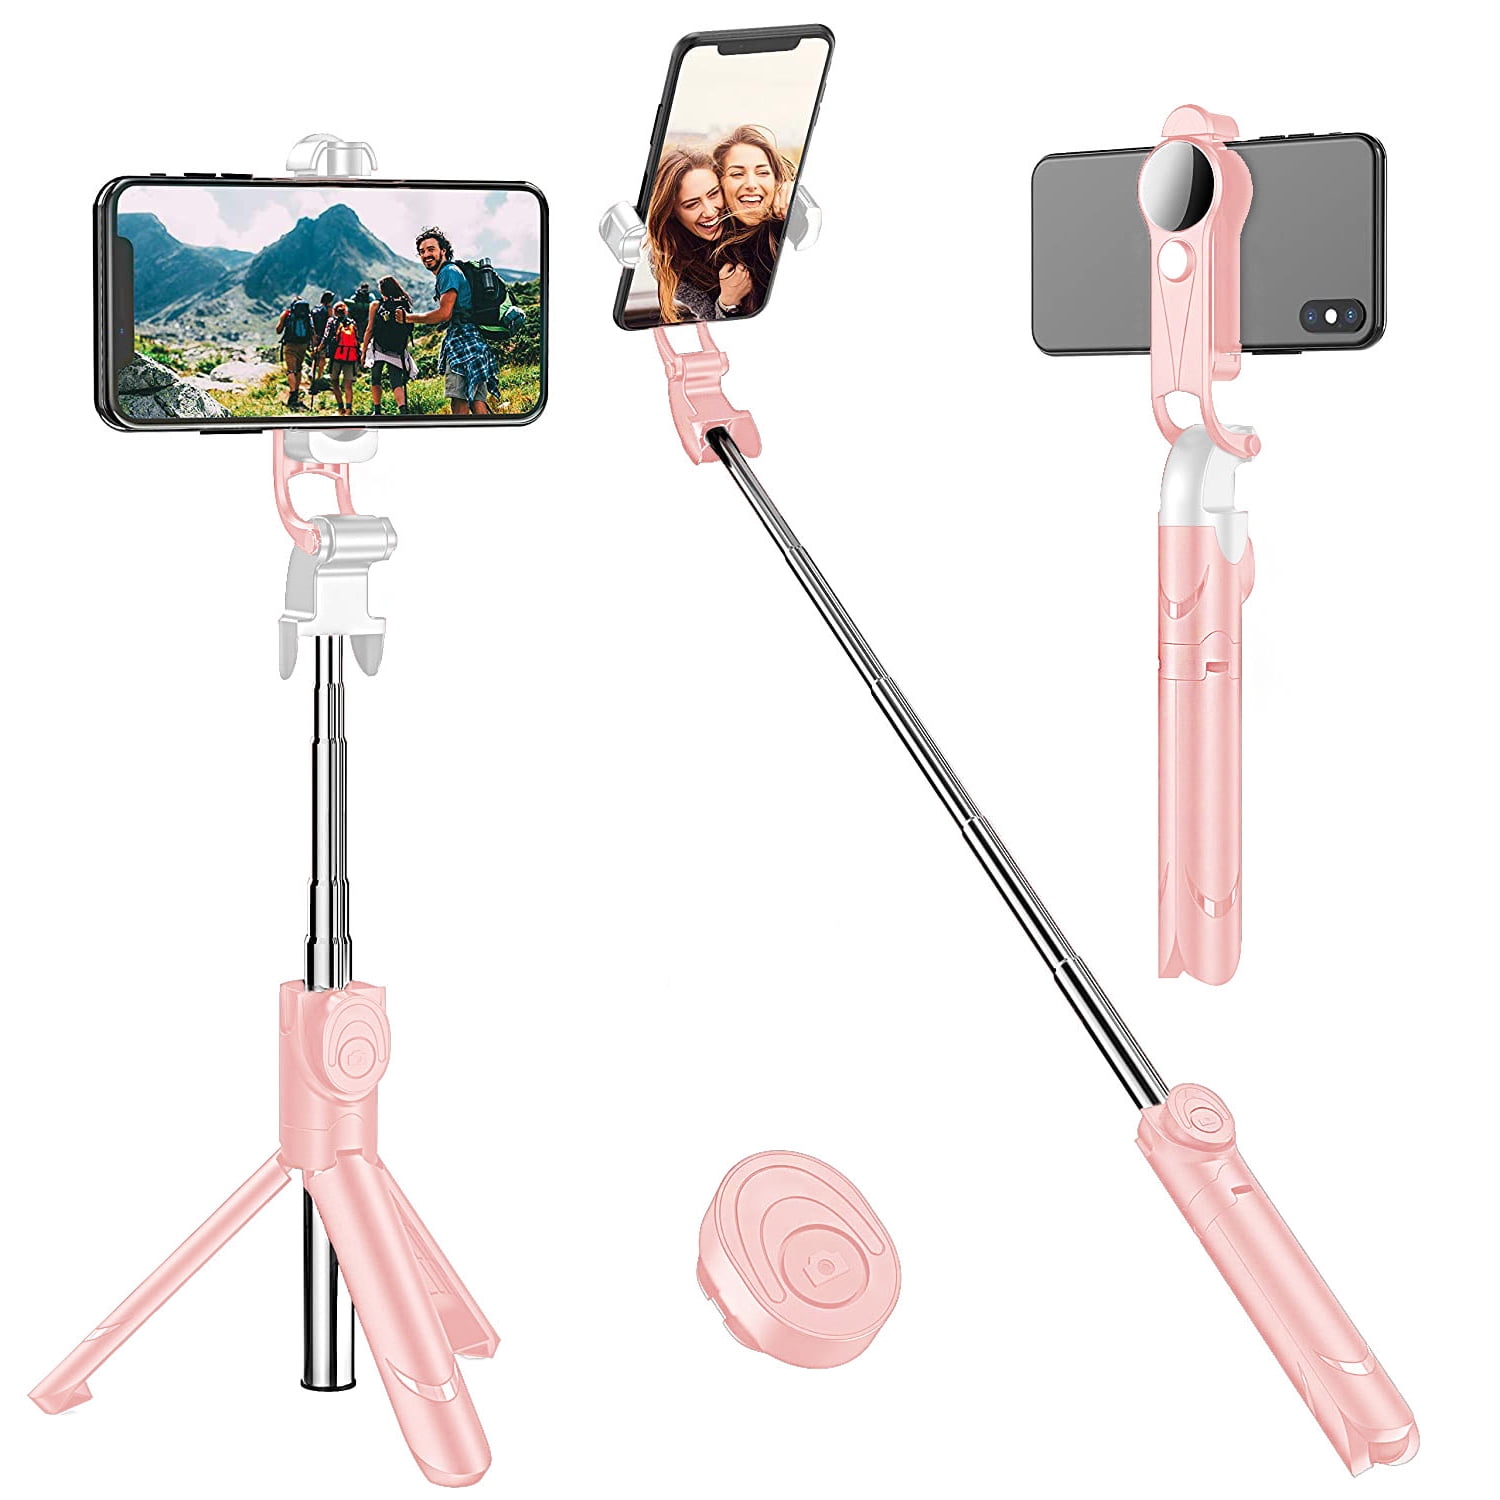 Selfie Sticks & Tripods Cell Phone Stand with Wireless Bluetooth Remote & Fill Light Mini Portable Extendable Selfie Stick for iPhone 11/XR/X/8/8Plus/7/7Plus/6s/6 Samsung Galaxy Android 